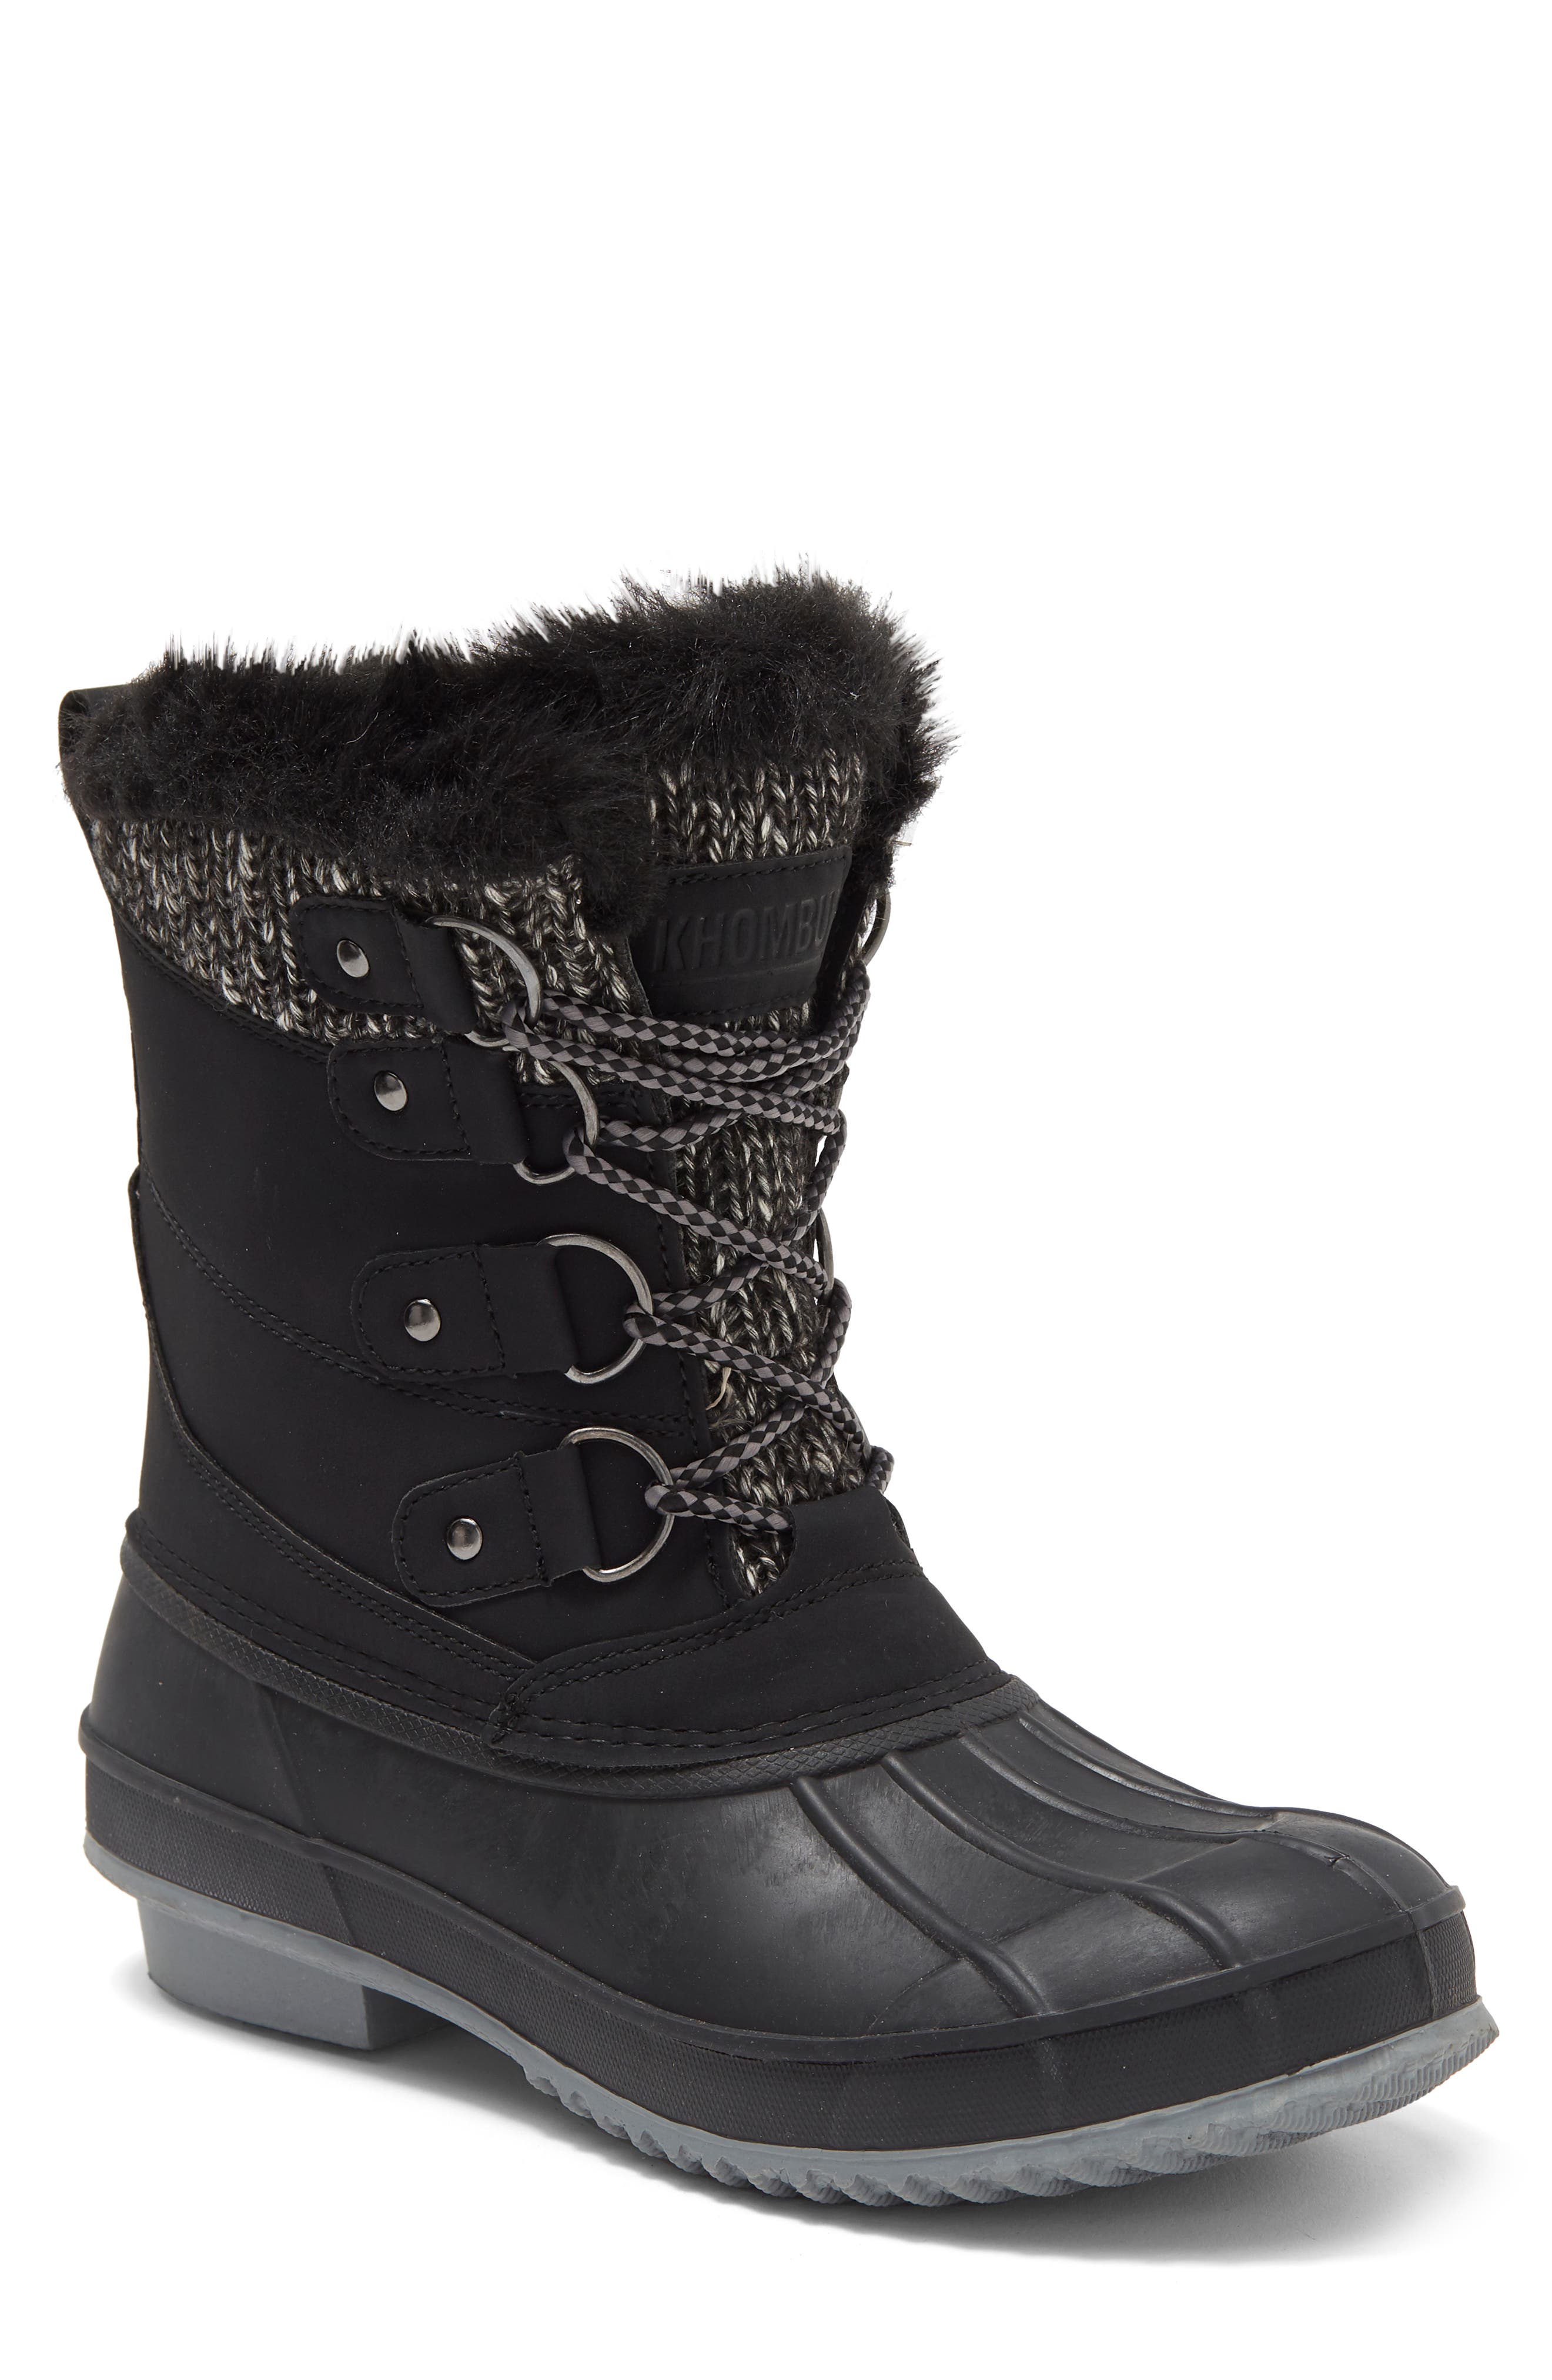 Ladies Water Resistant Cushion Mucker Boot with Faux Fur Lining & Gem Detail 